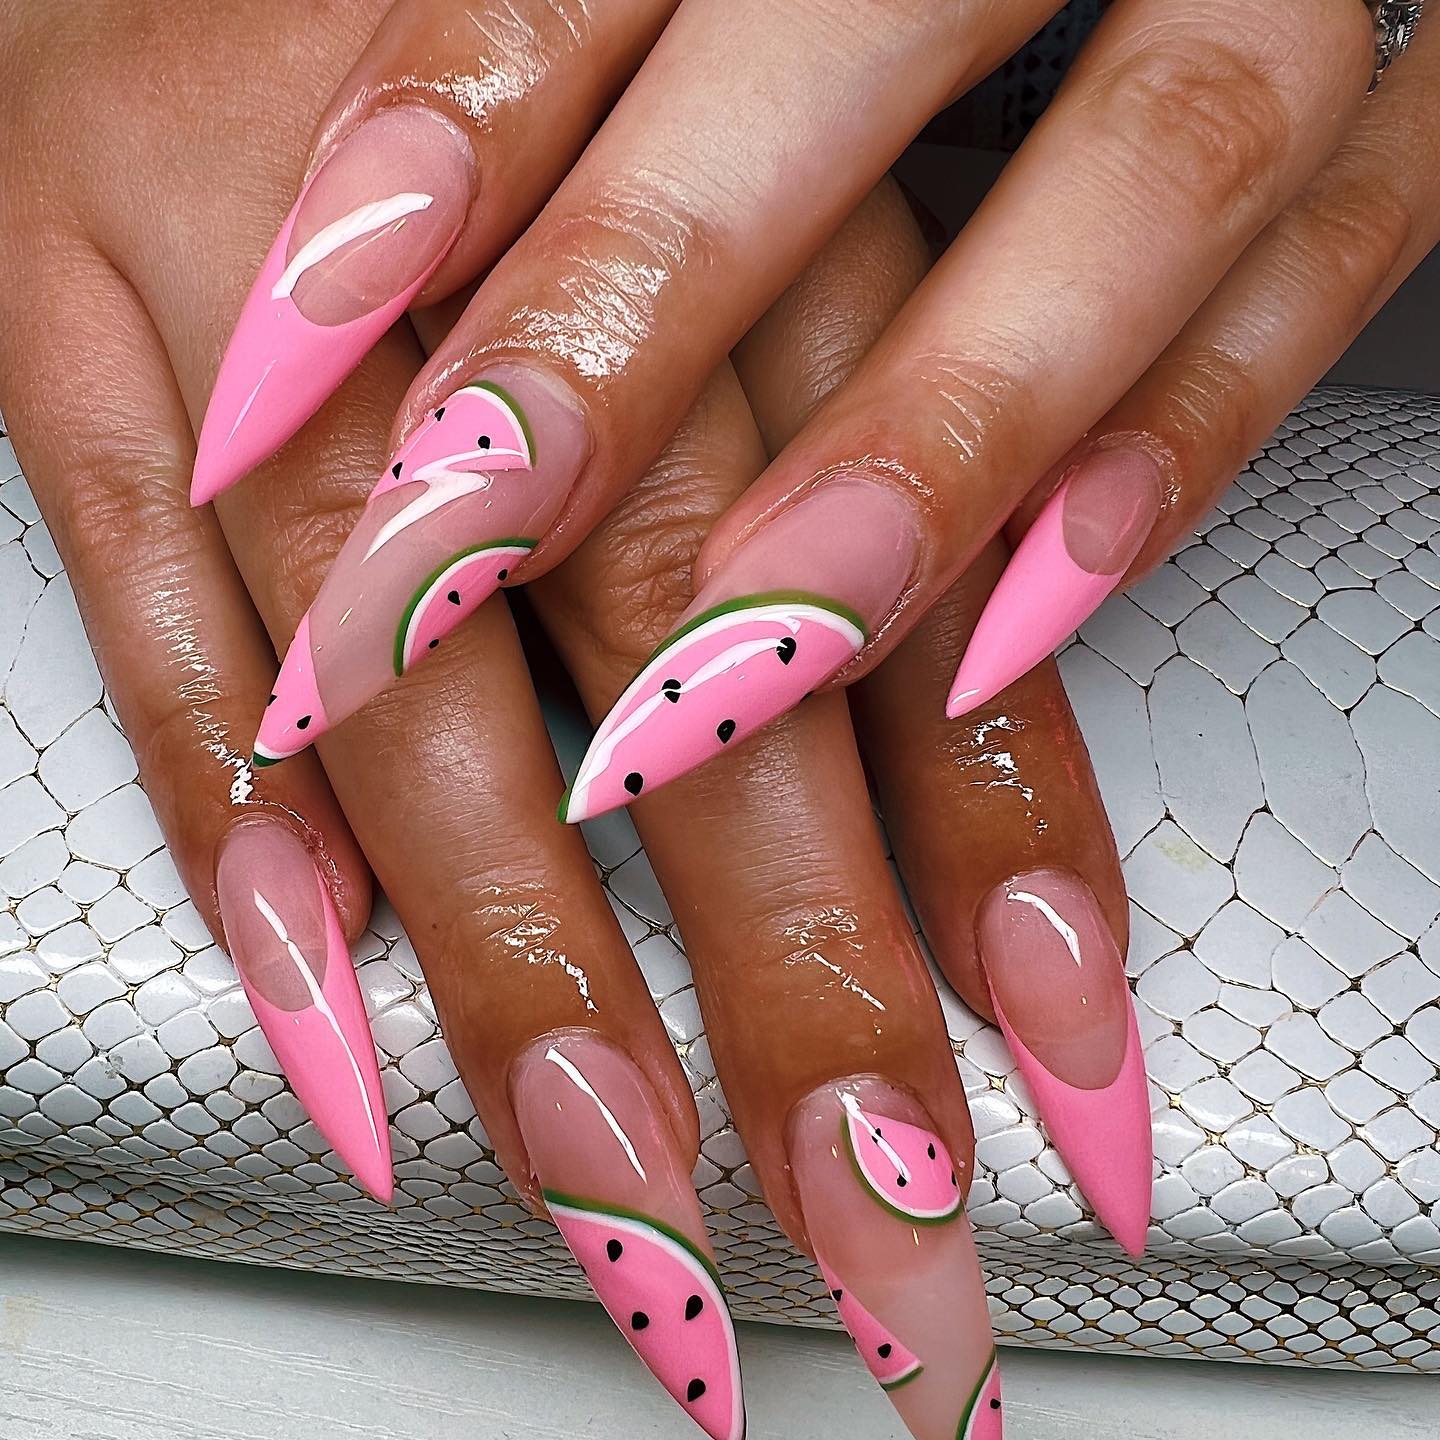 For your summer nails, pink watermelon nail arts are so popular. With these cute nail arts and pink French tips, you will rock.